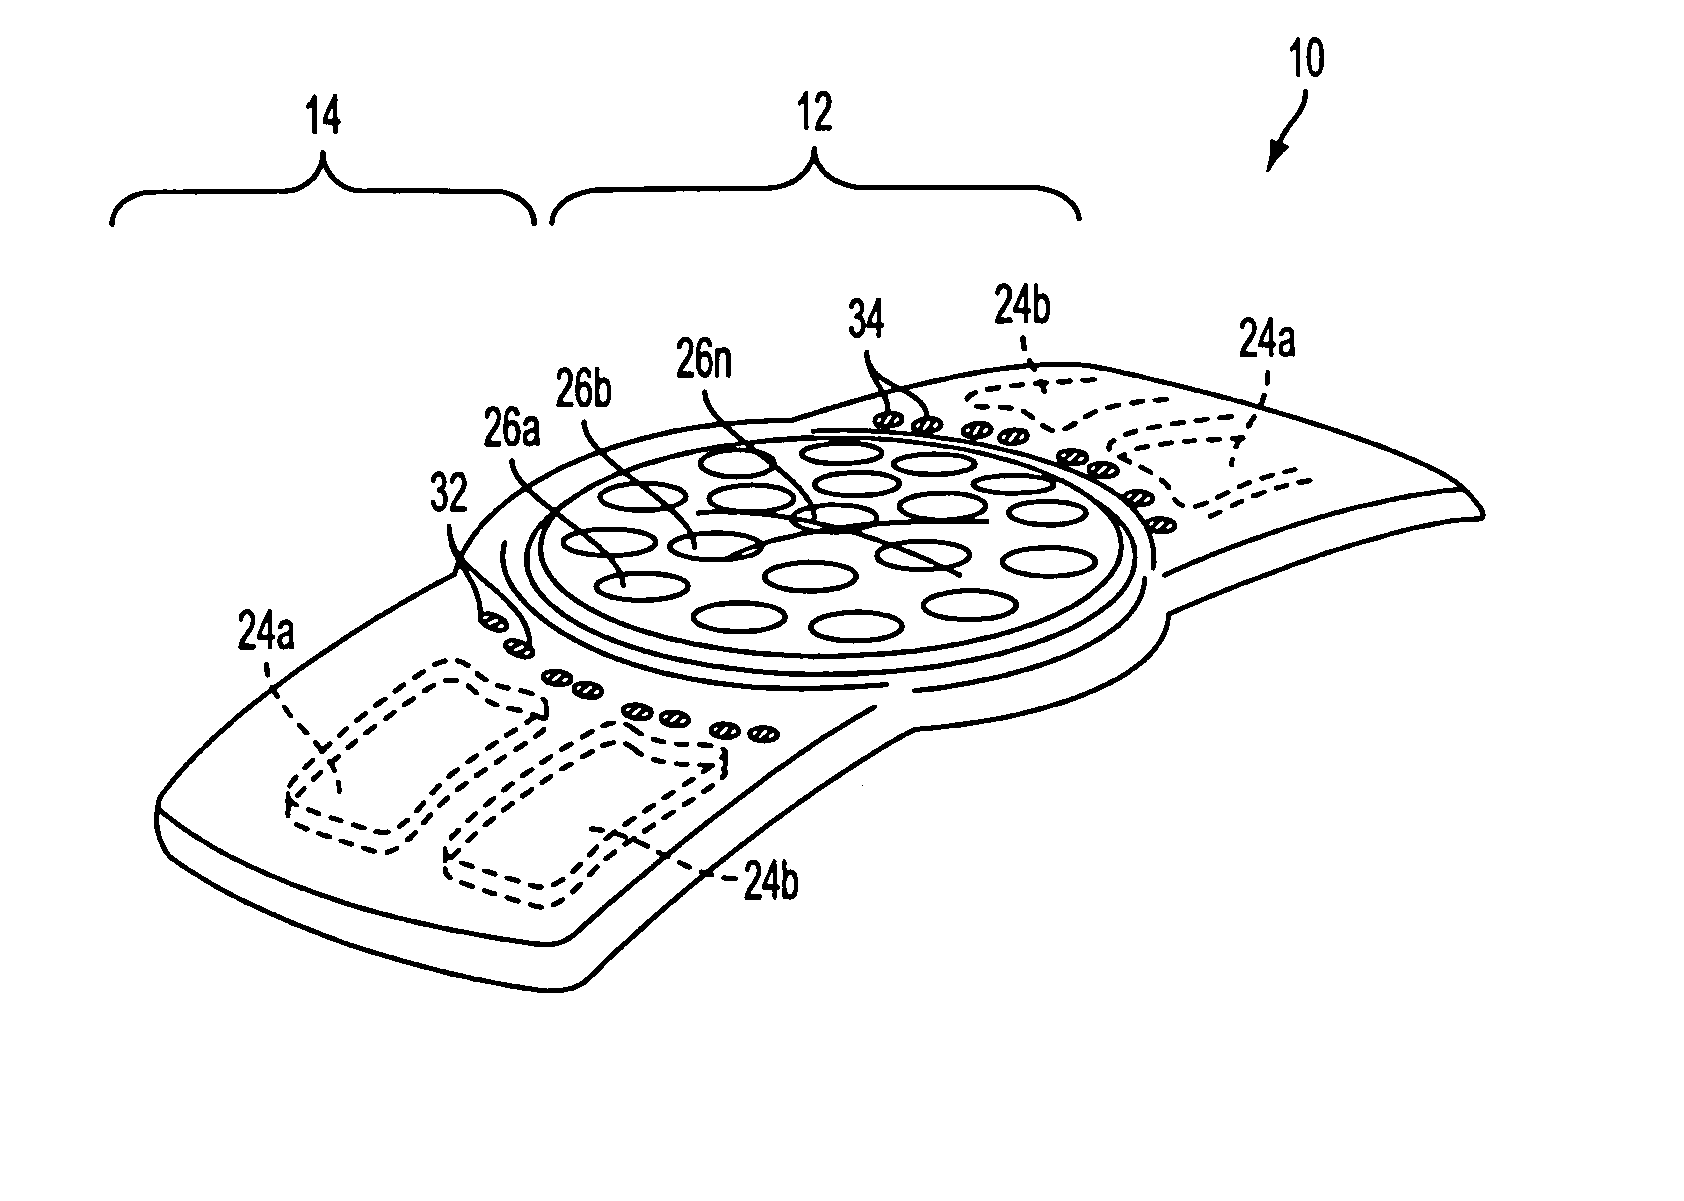 Lens system and method for power adjustment using externally actuated micropumps